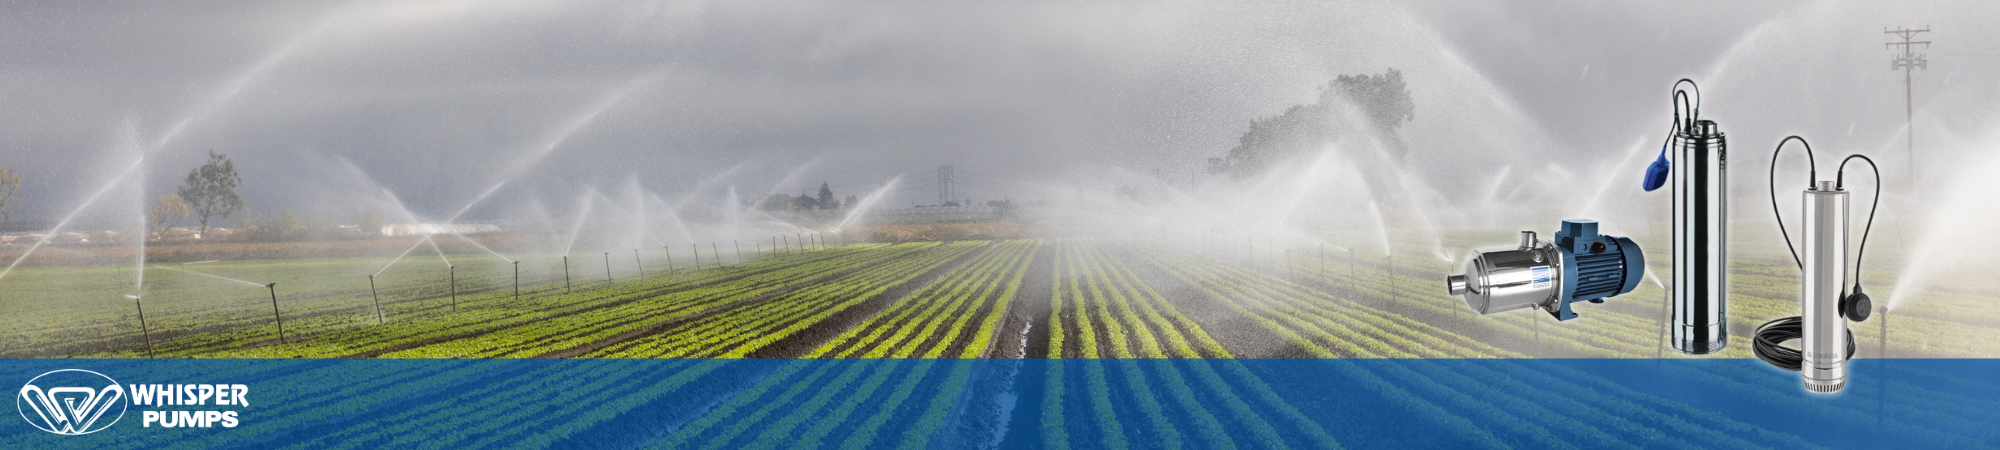 Flood, Pressurised, Drip or Sprinkle: What Type of Irrigation Pump Do You Need? 